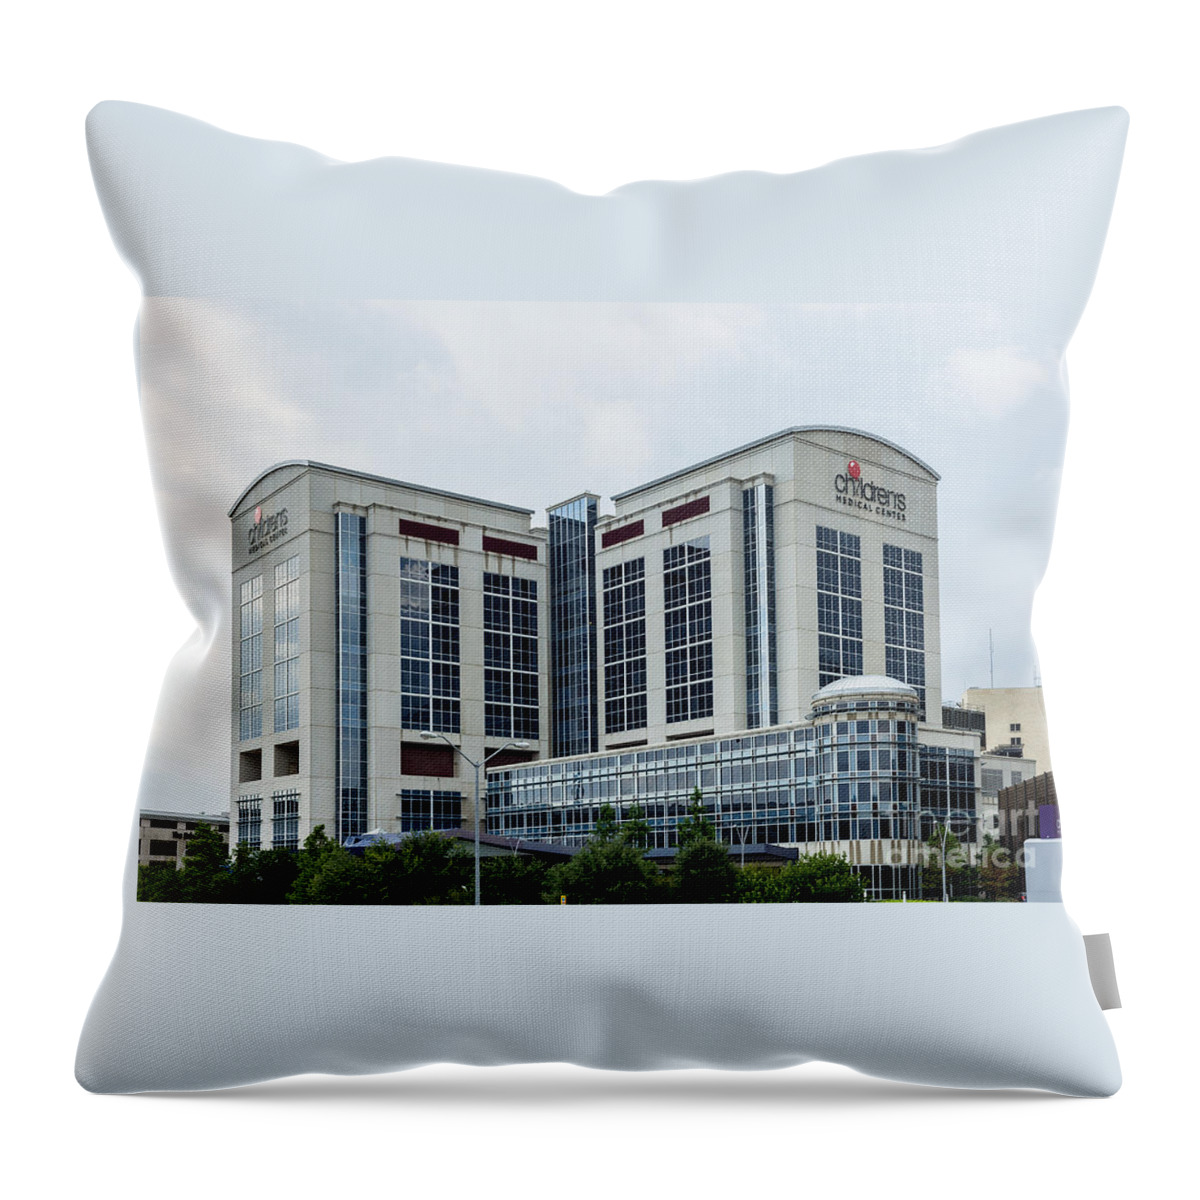 Dallas Throw Pillow featuring the photograph Dallas Children's Medical Center Hospital by Imagery by Charly